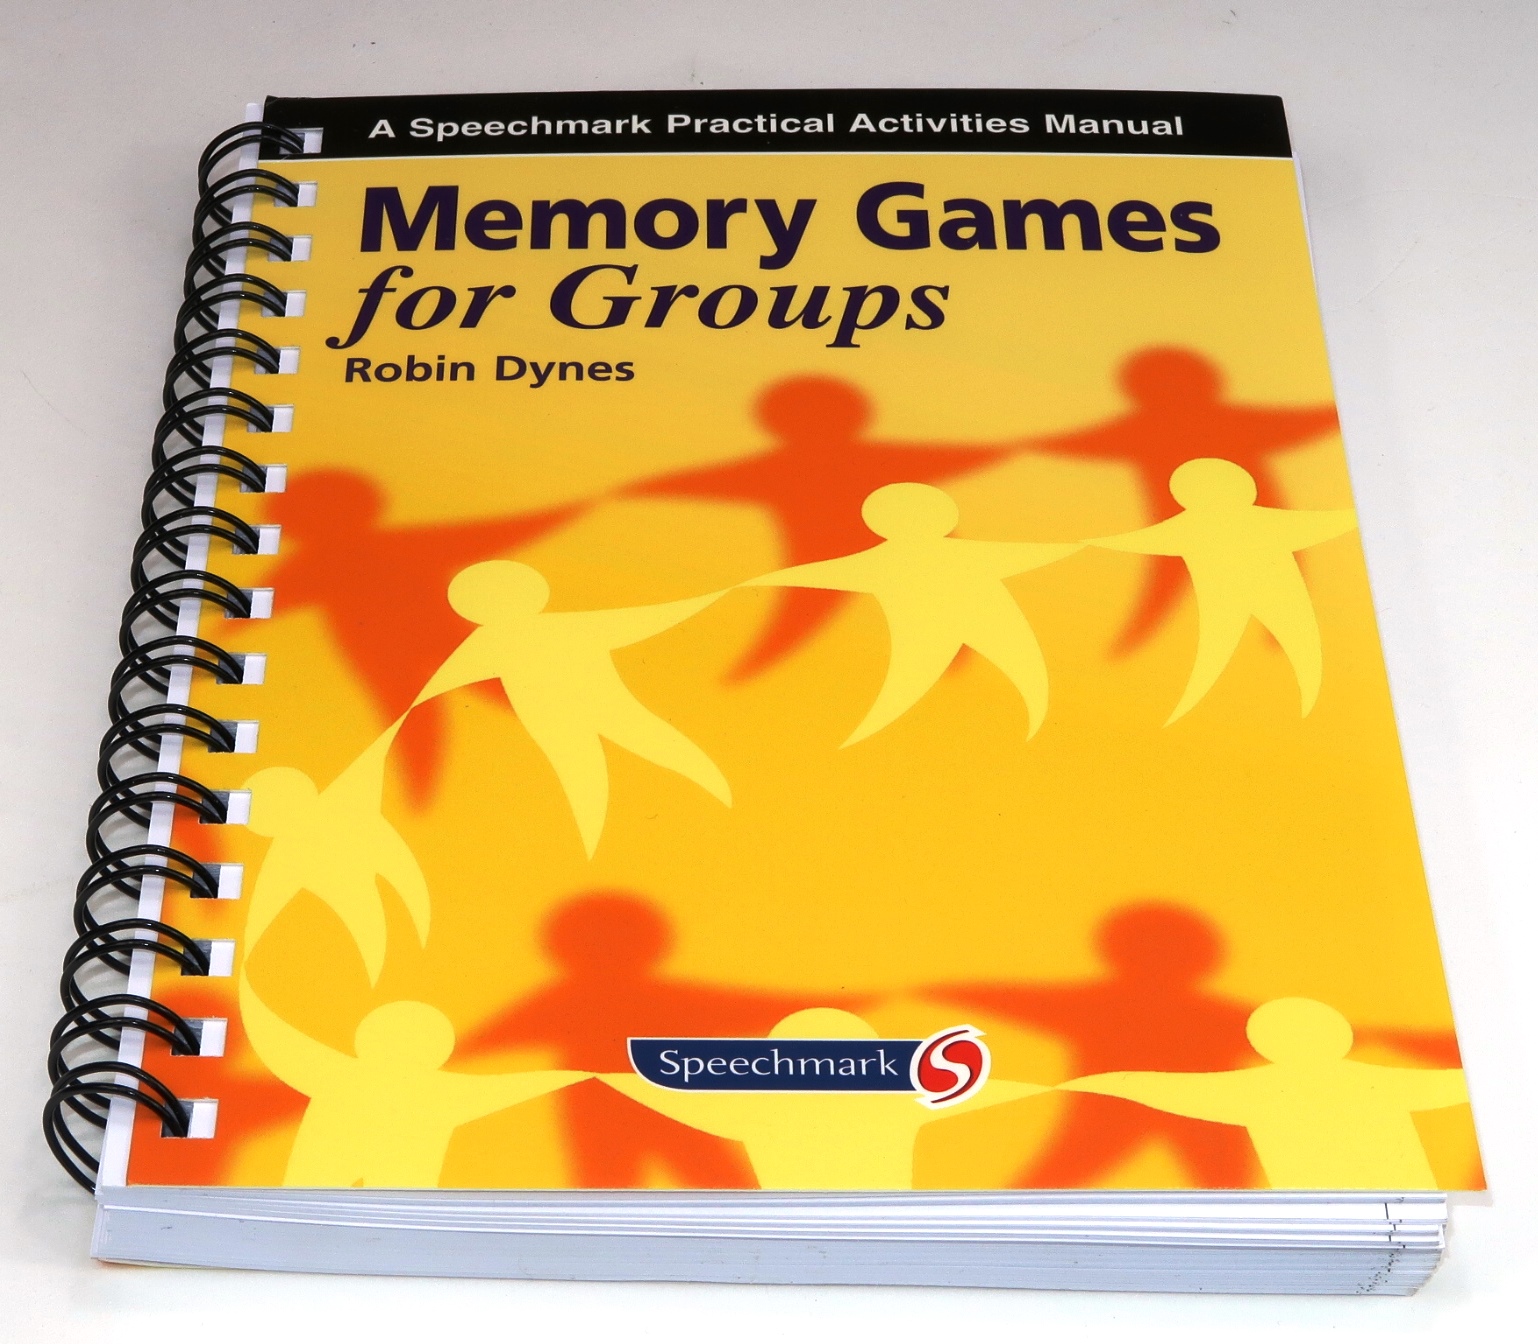 Livre : Memory Games for Groups (anglais) 180 pages -- 002-2693